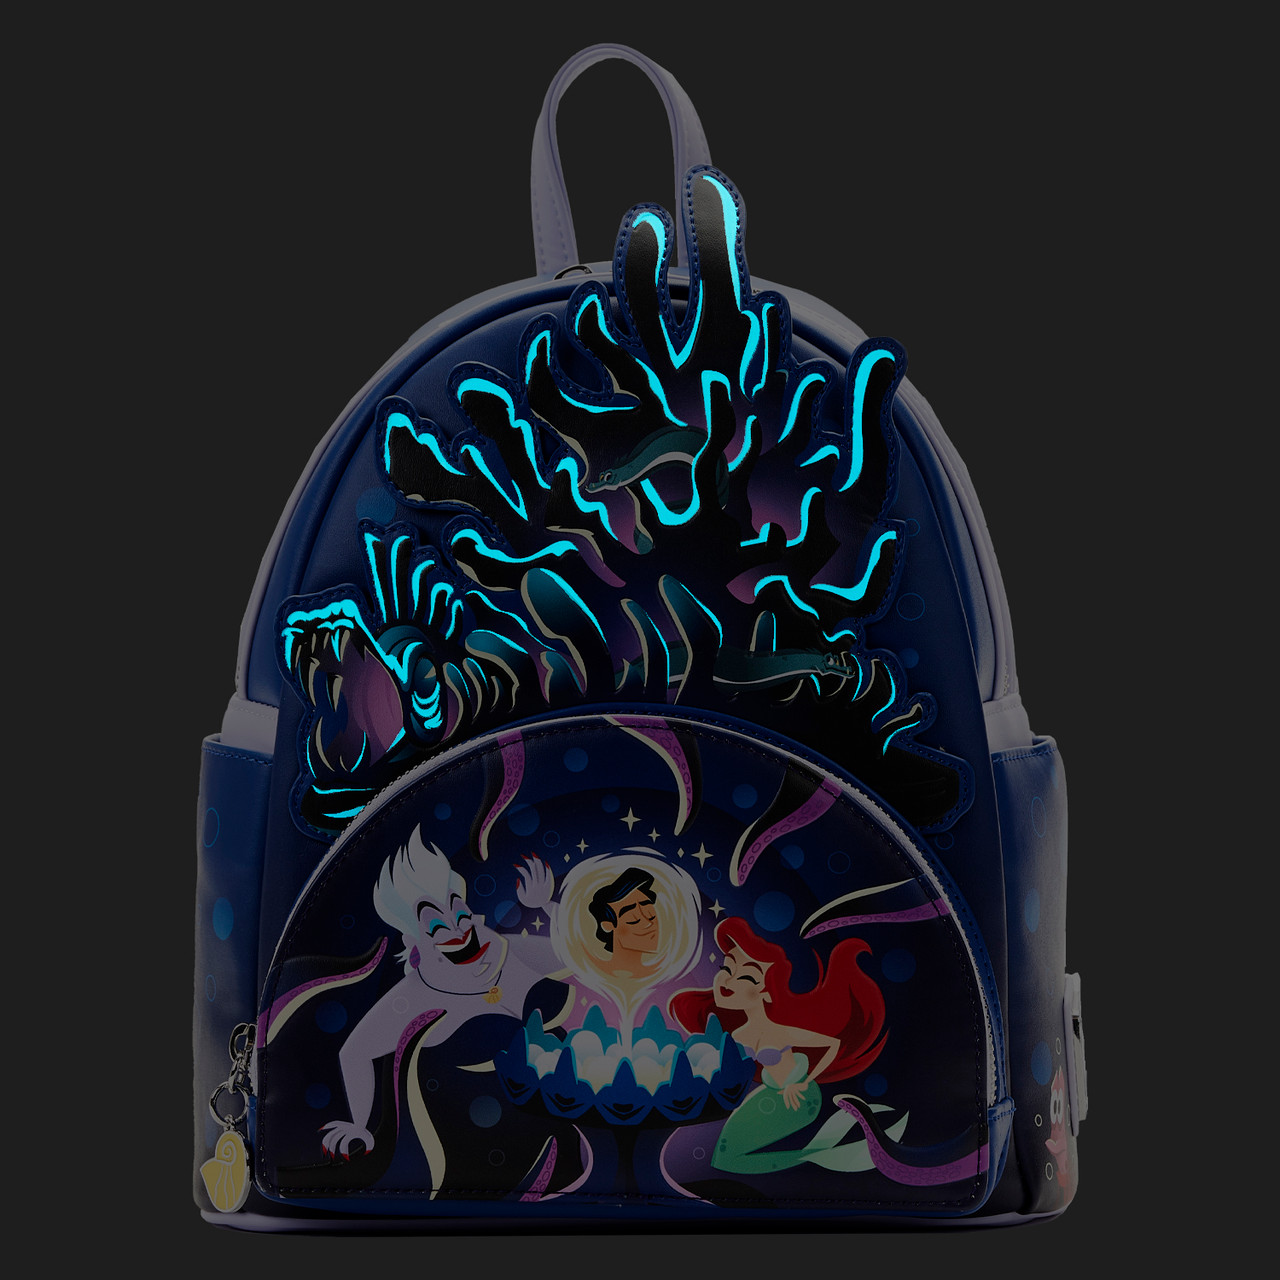 Buy Your The Little Mermaid Ursula Loungefly Backpack (Free